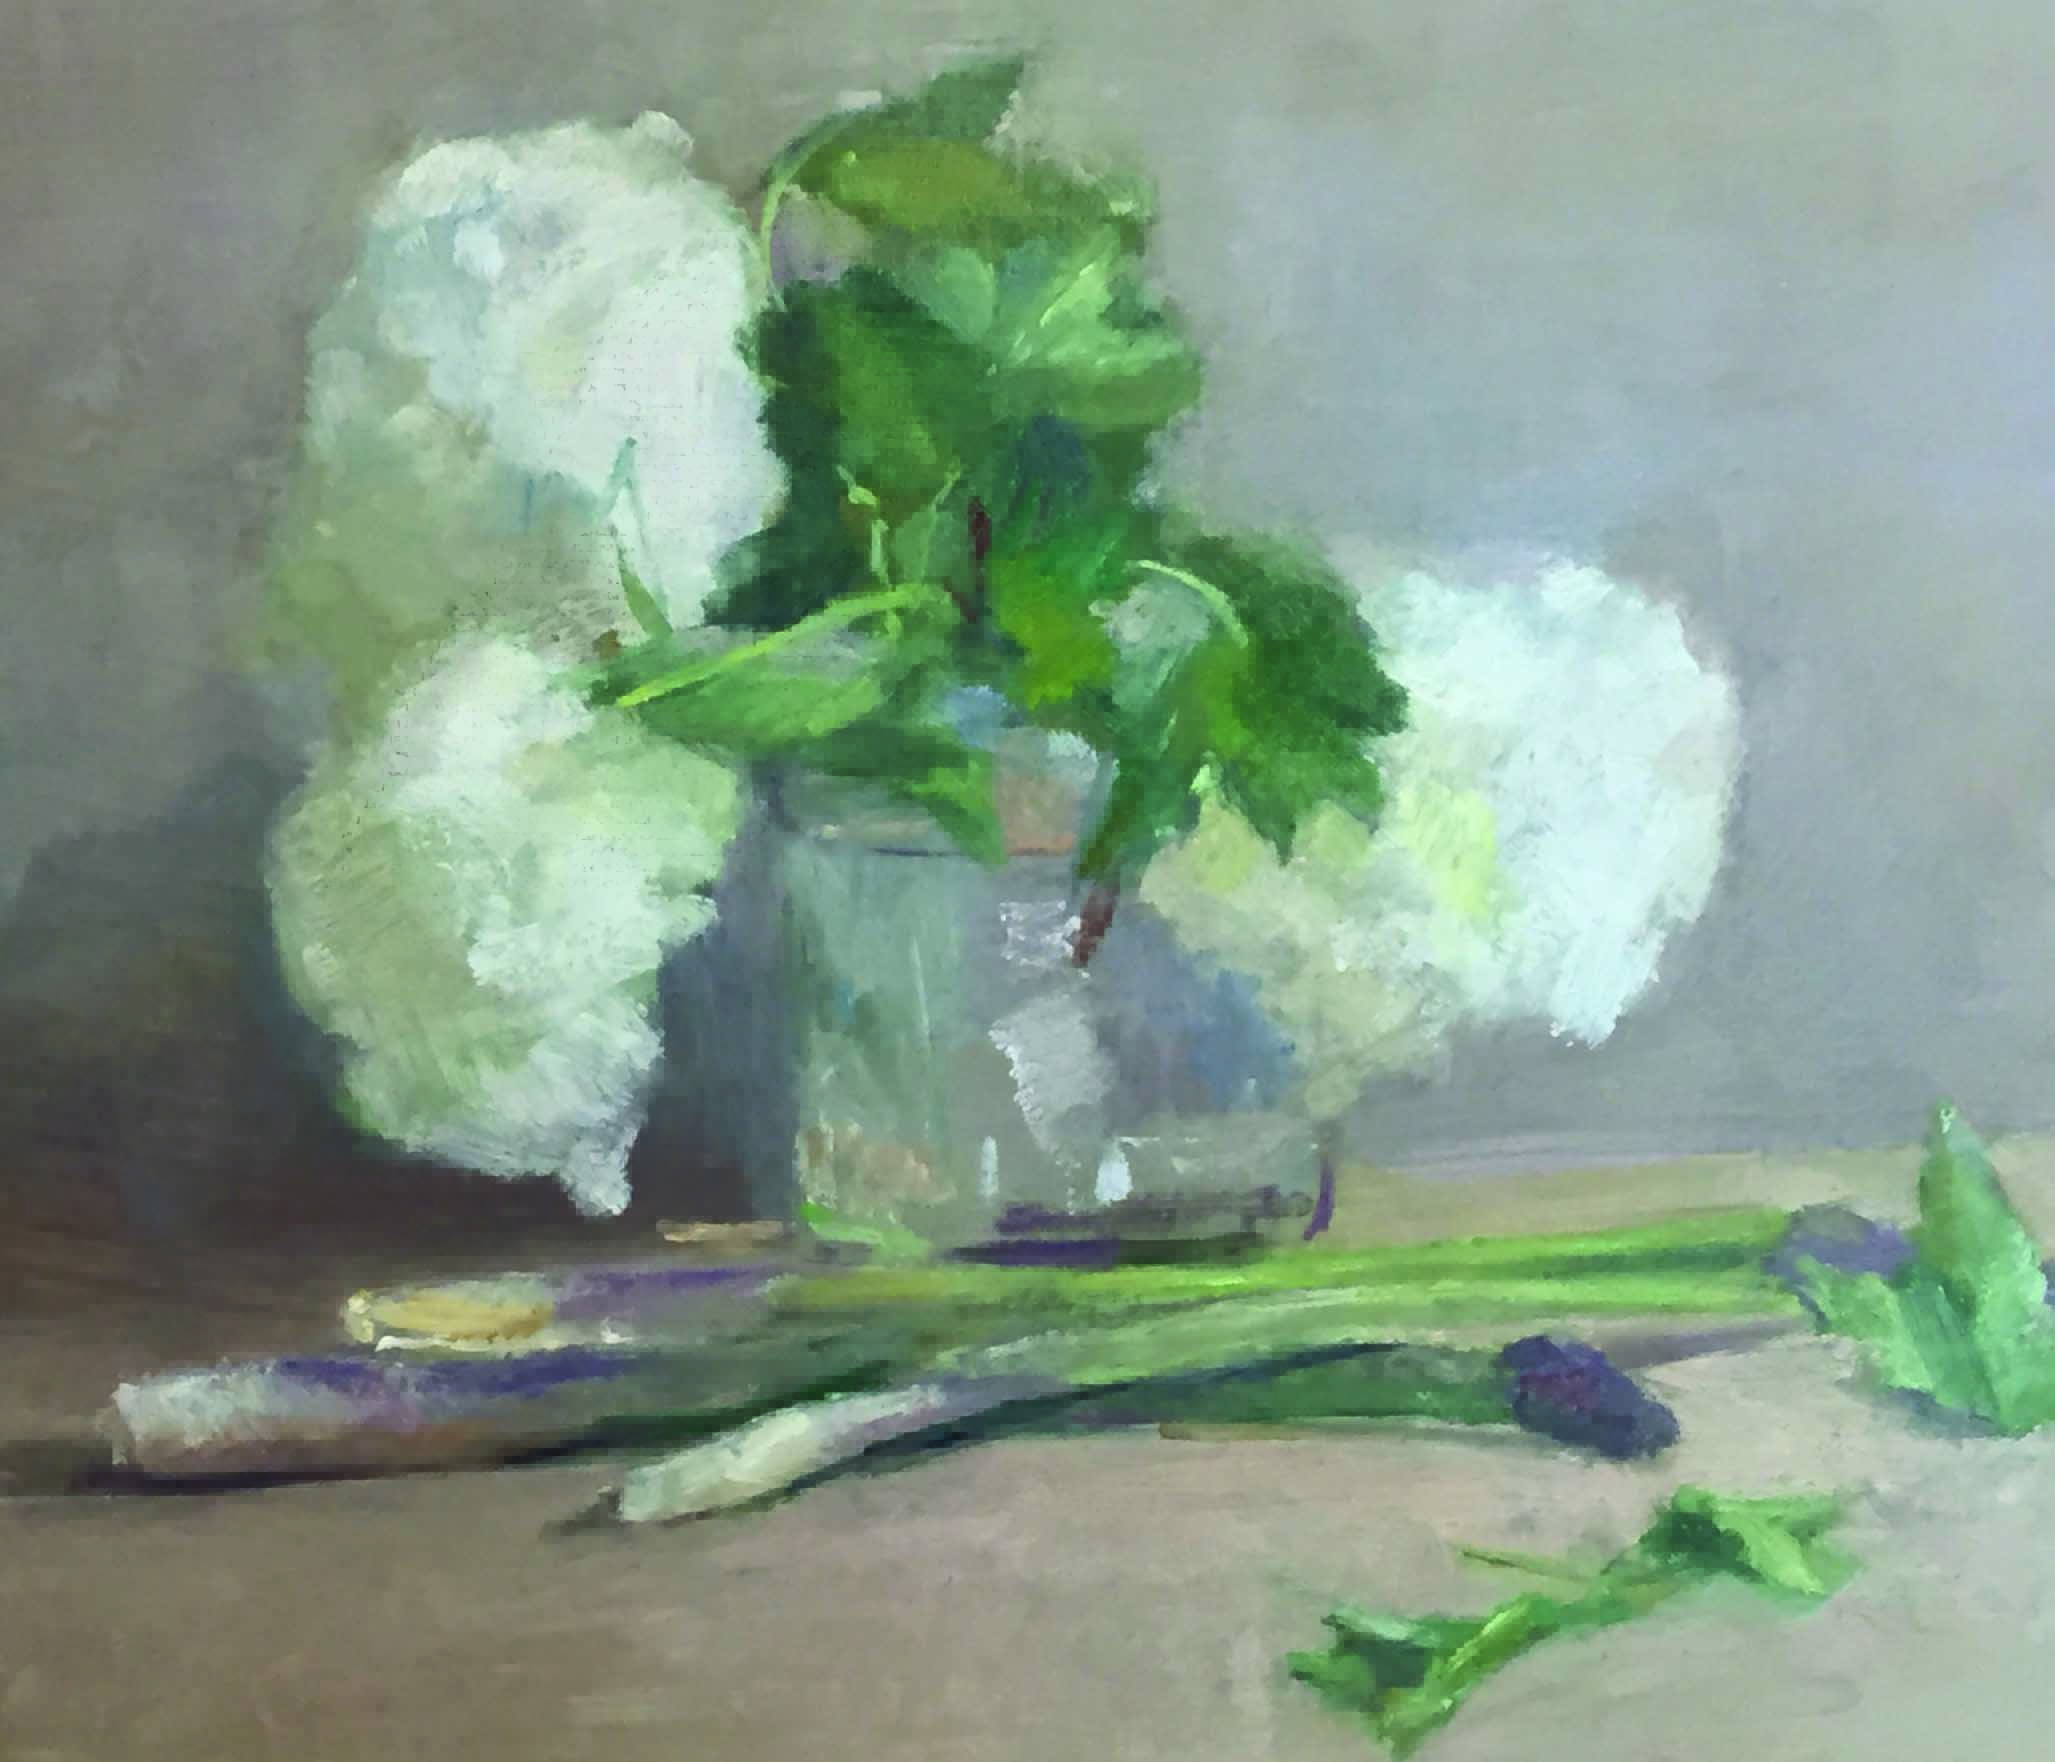 Study in White and Green